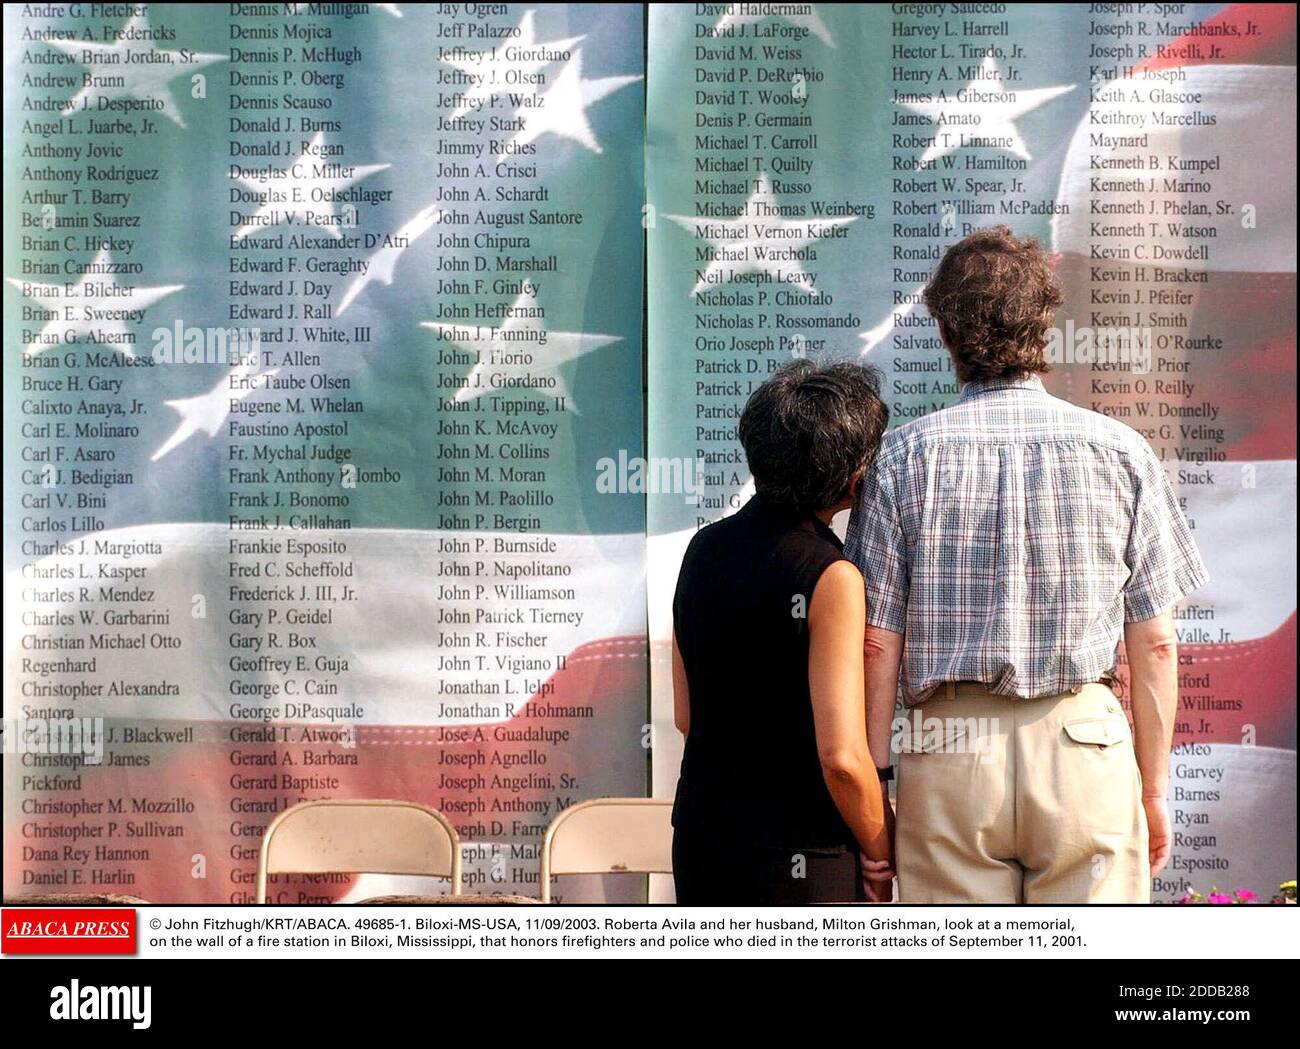 NO FILM, NO VIDEO, NO TV, NO DOCUMENTARY - © John Fitzhugh/KRT/ABACA. 49685-1. Biloxi-MS-USA, 11/09/2003. Roberta Avila and her husband, Milton Grishman, look at a memorial, on the wall of a fire station in Biloxi, Mississippi, that honors firefighters and police who died in the terrorist attacks Stock Photo